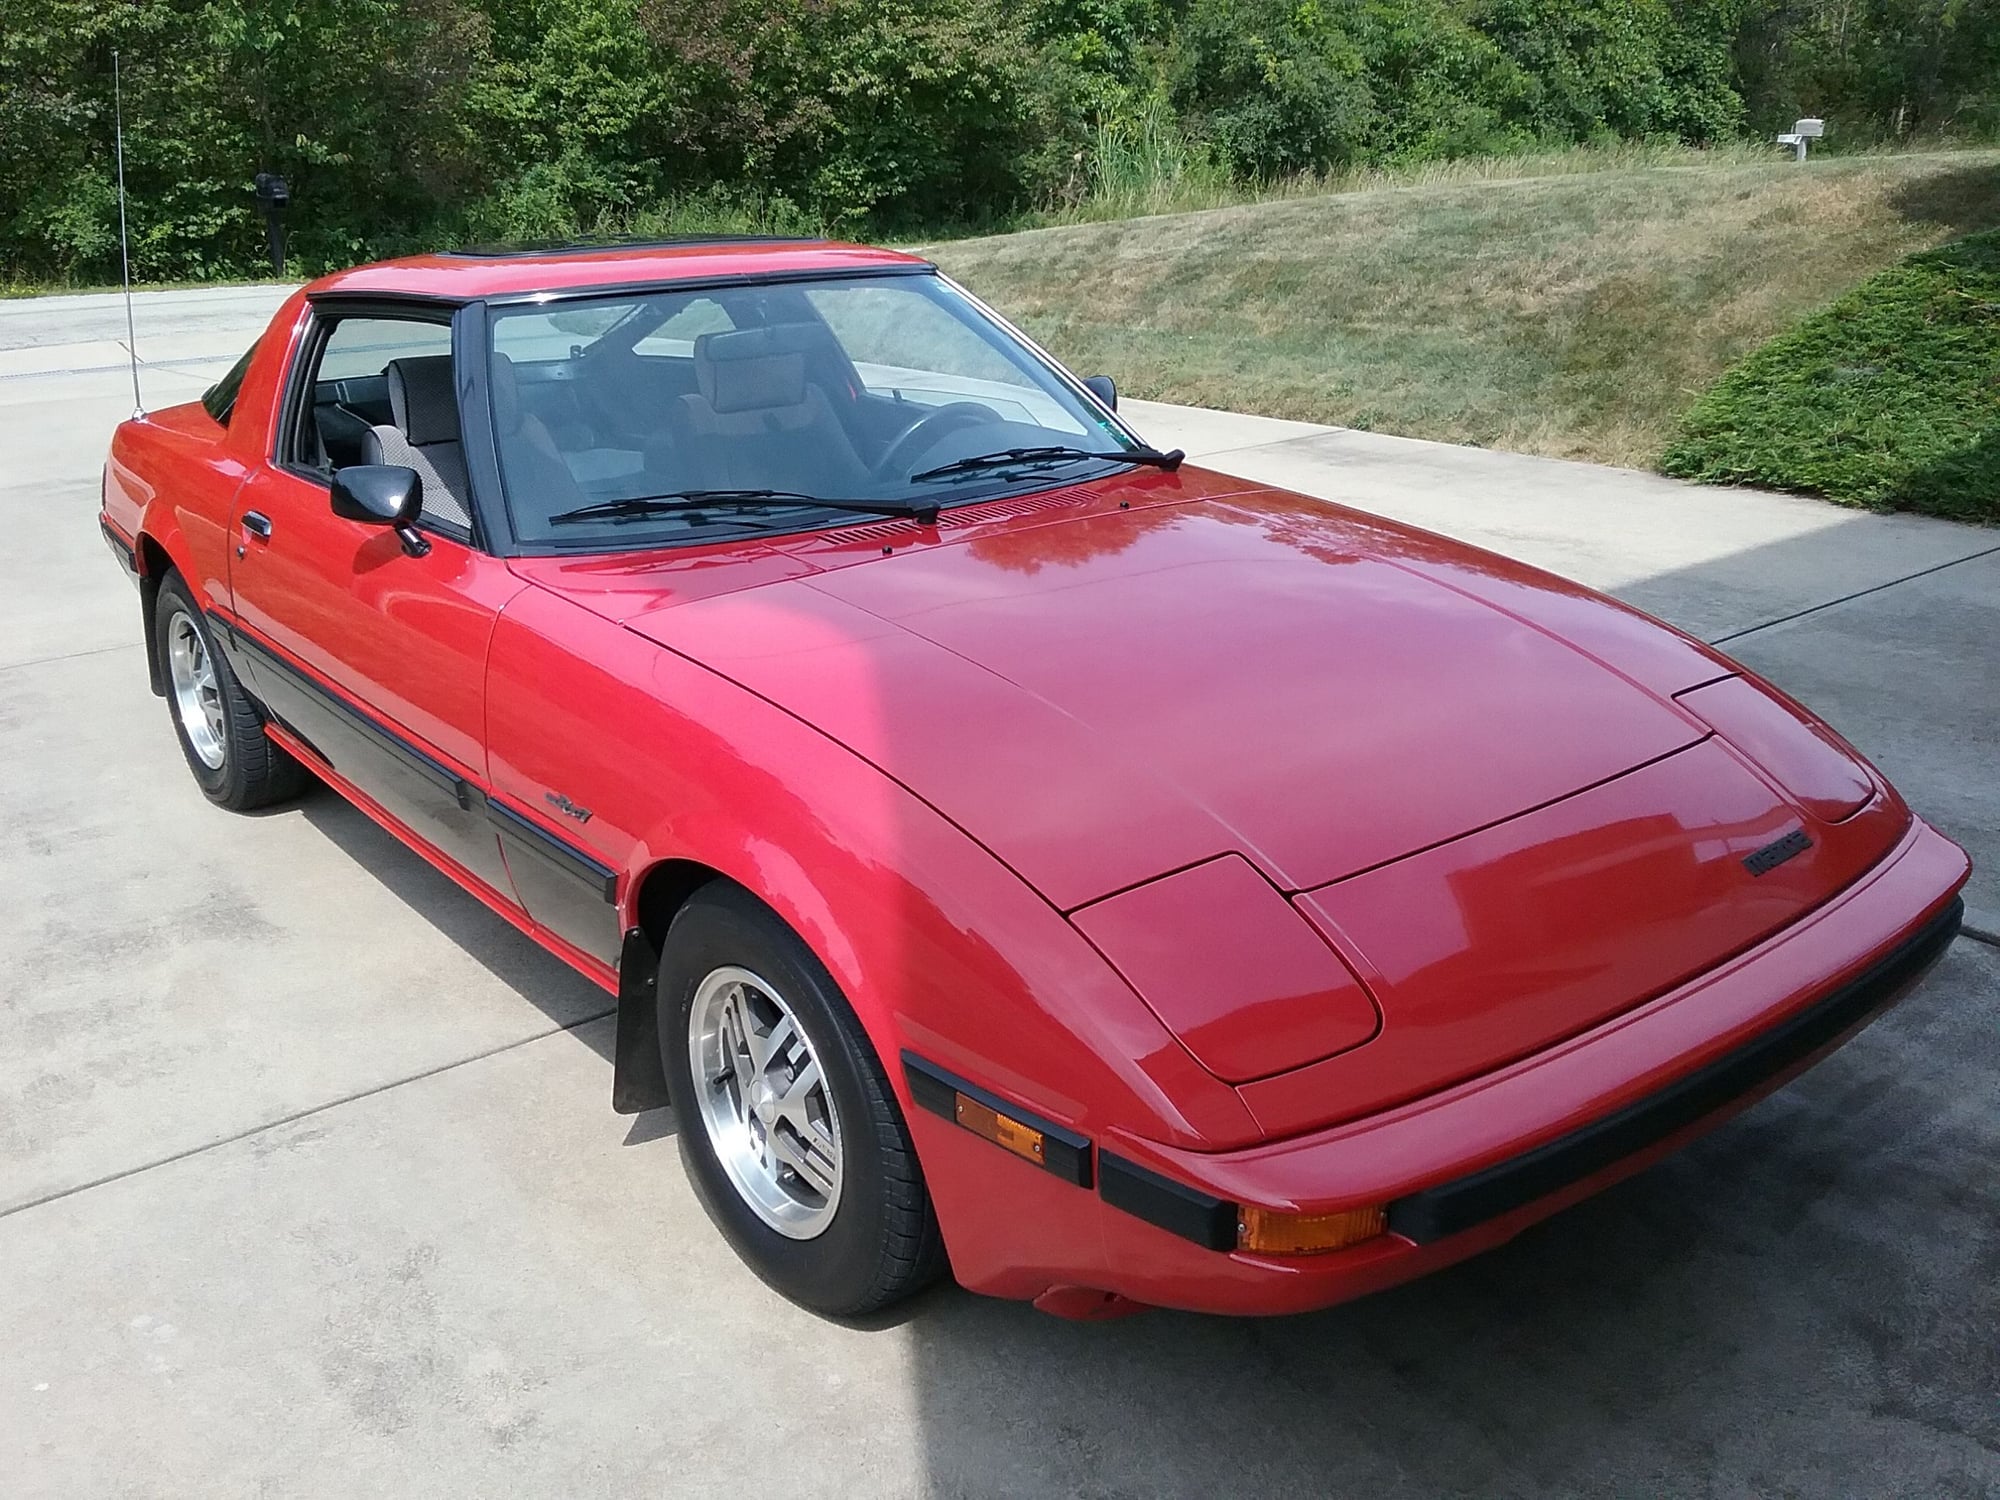 1985 Mazda RX-7 - 1985 Classic Mazda RX7 - Used - VIN JM1FB3317F0889088 - 56,501 Miles - 4 cyl - 2WD - Automatic - Coupe - Red - Hunker, PA 15639, United States